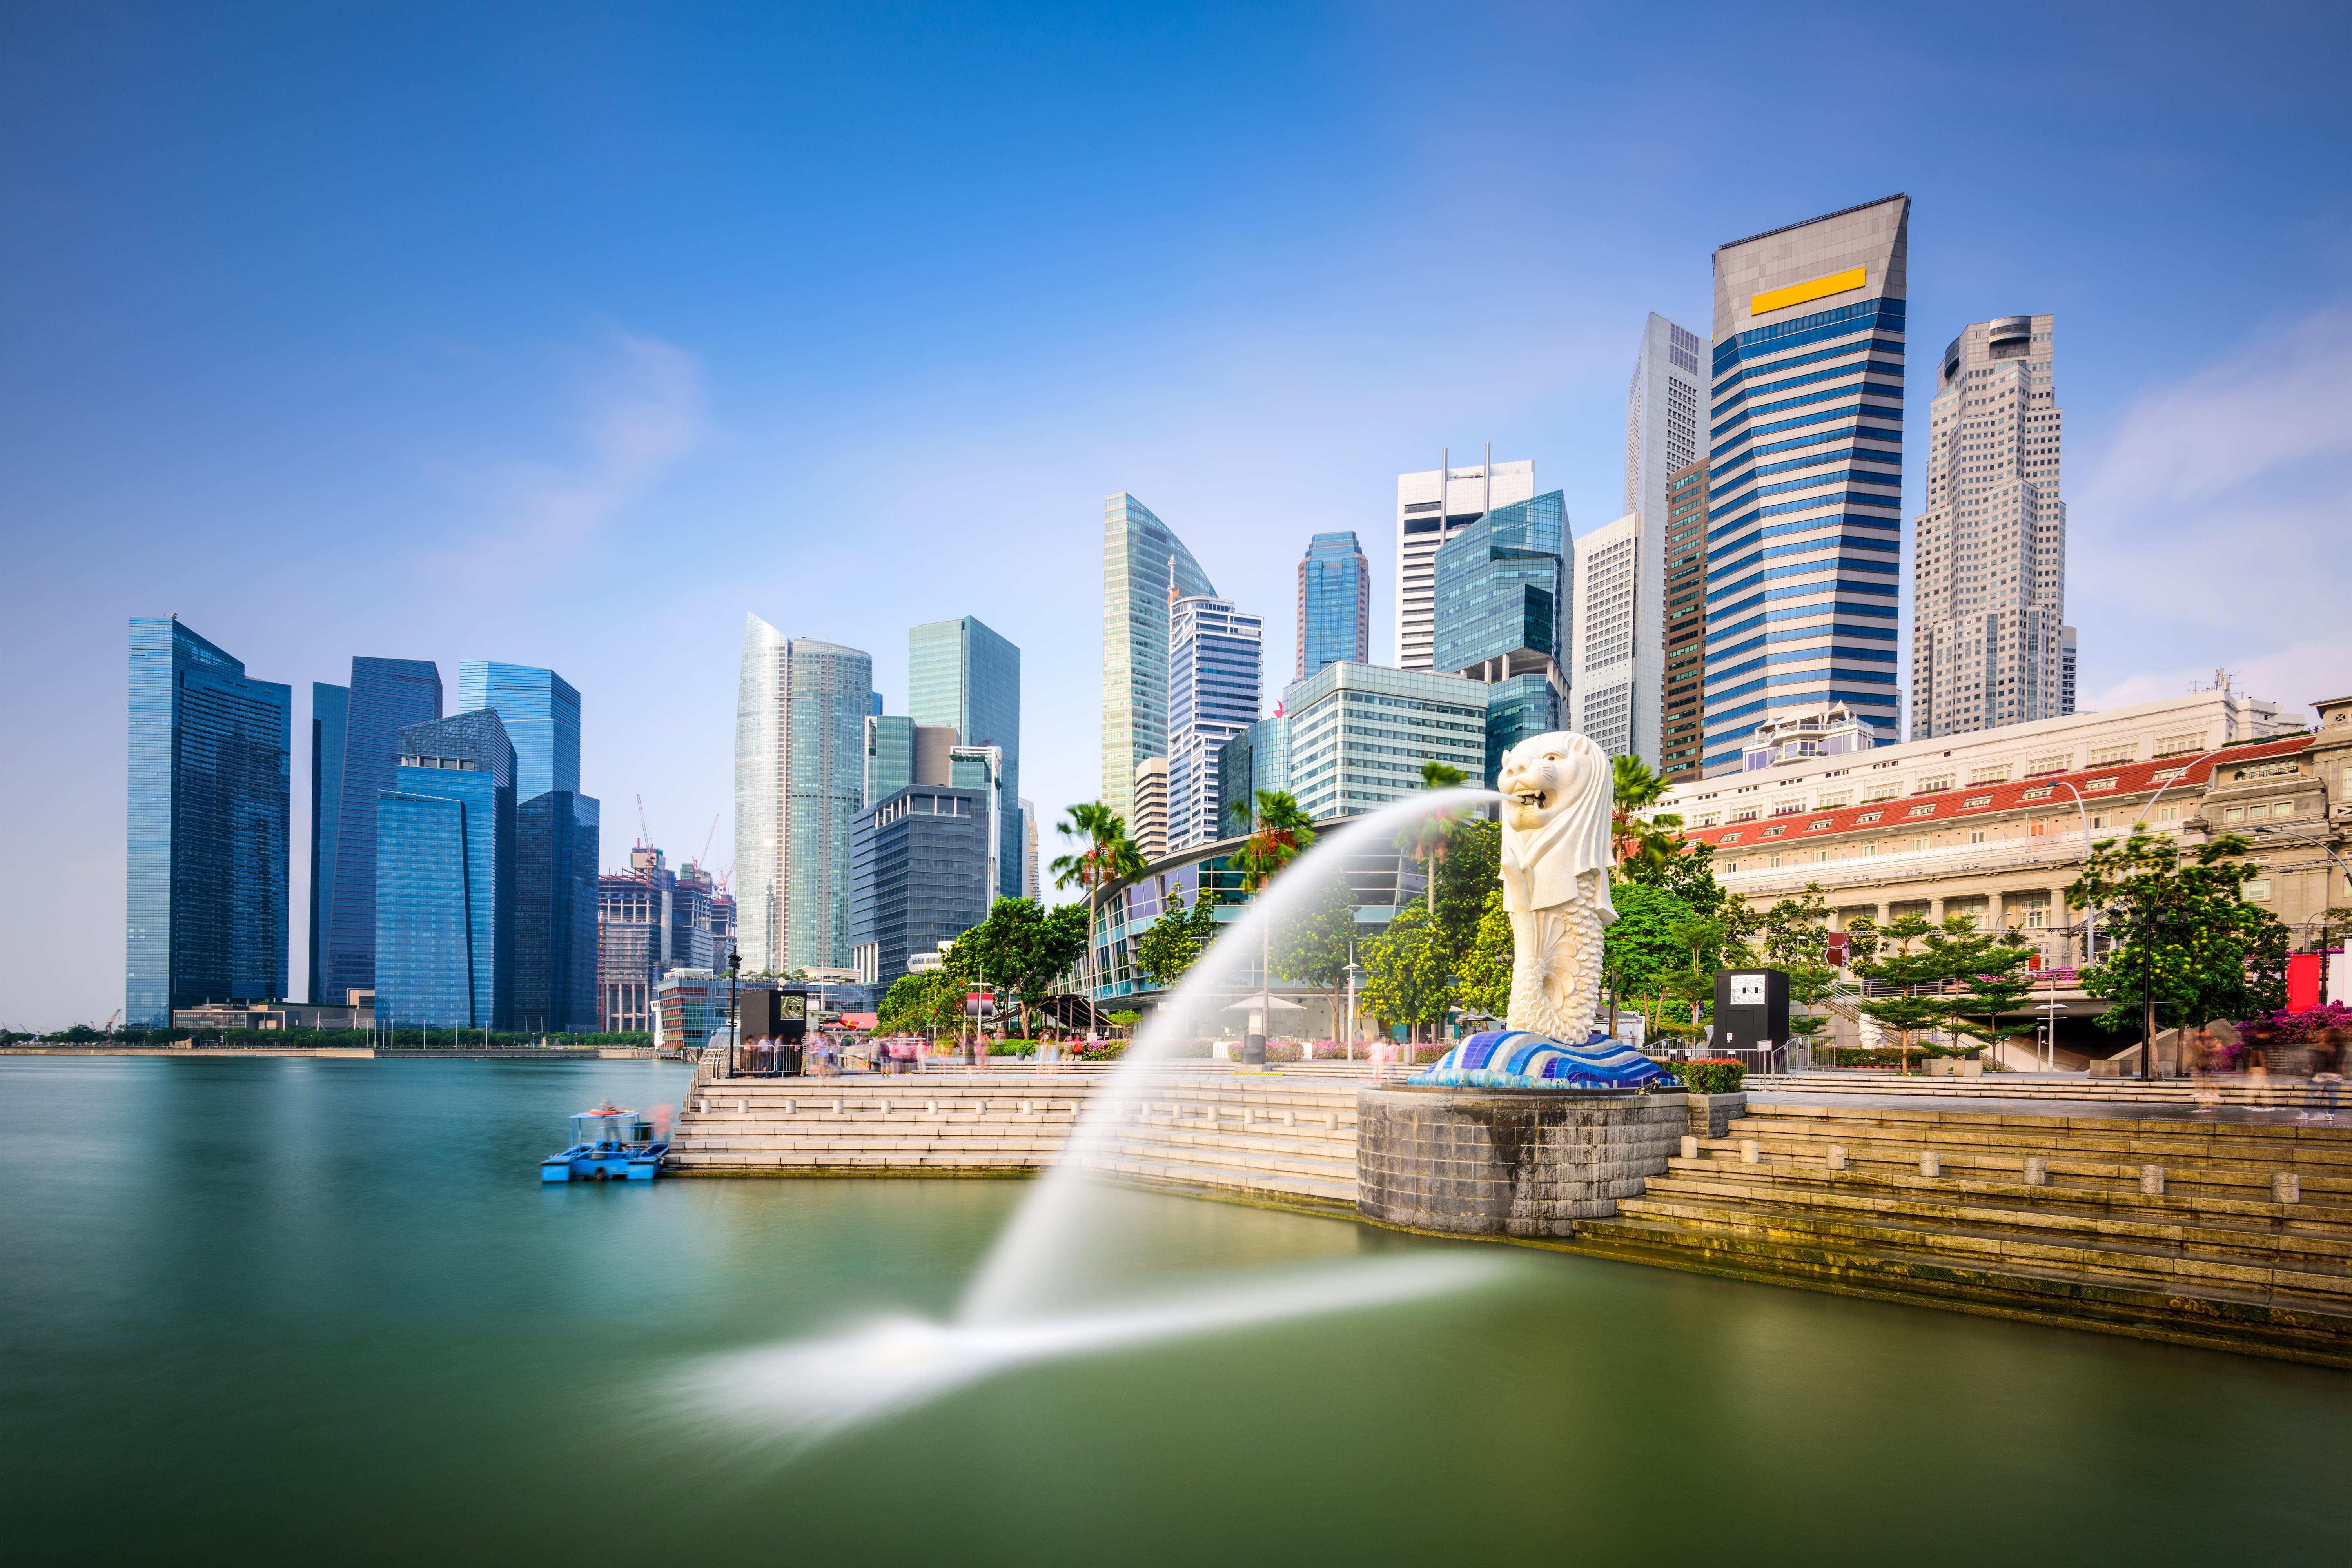 The iconic Merlion fountain on Singapore’s waterfront.